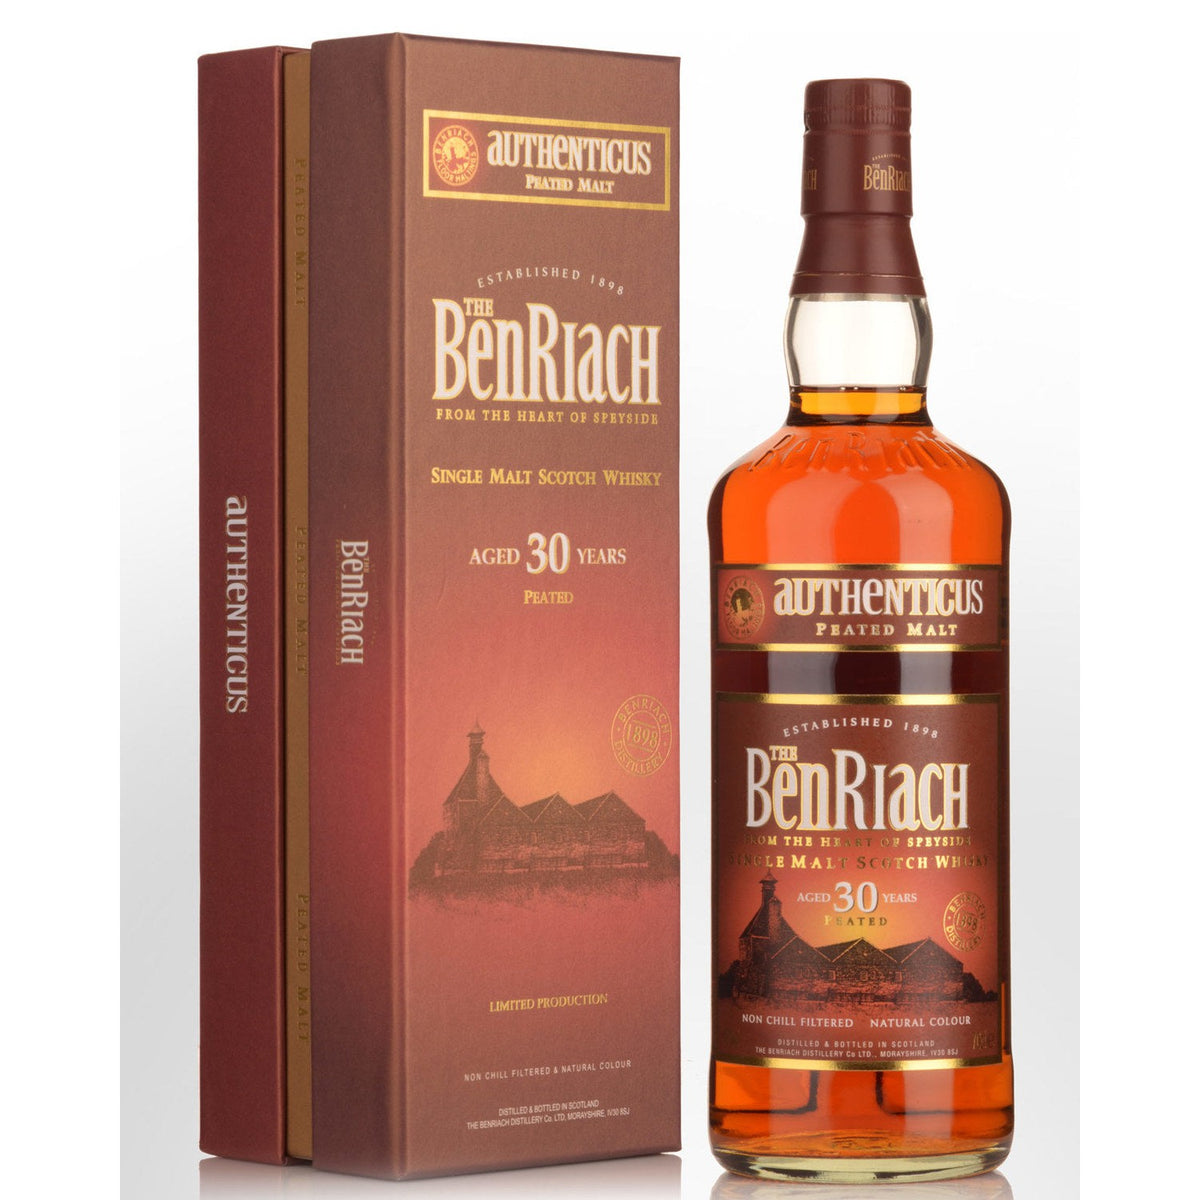 Benriach Authenticus Peated 30 Year Old Single Malt Scotch Whisky 700ml